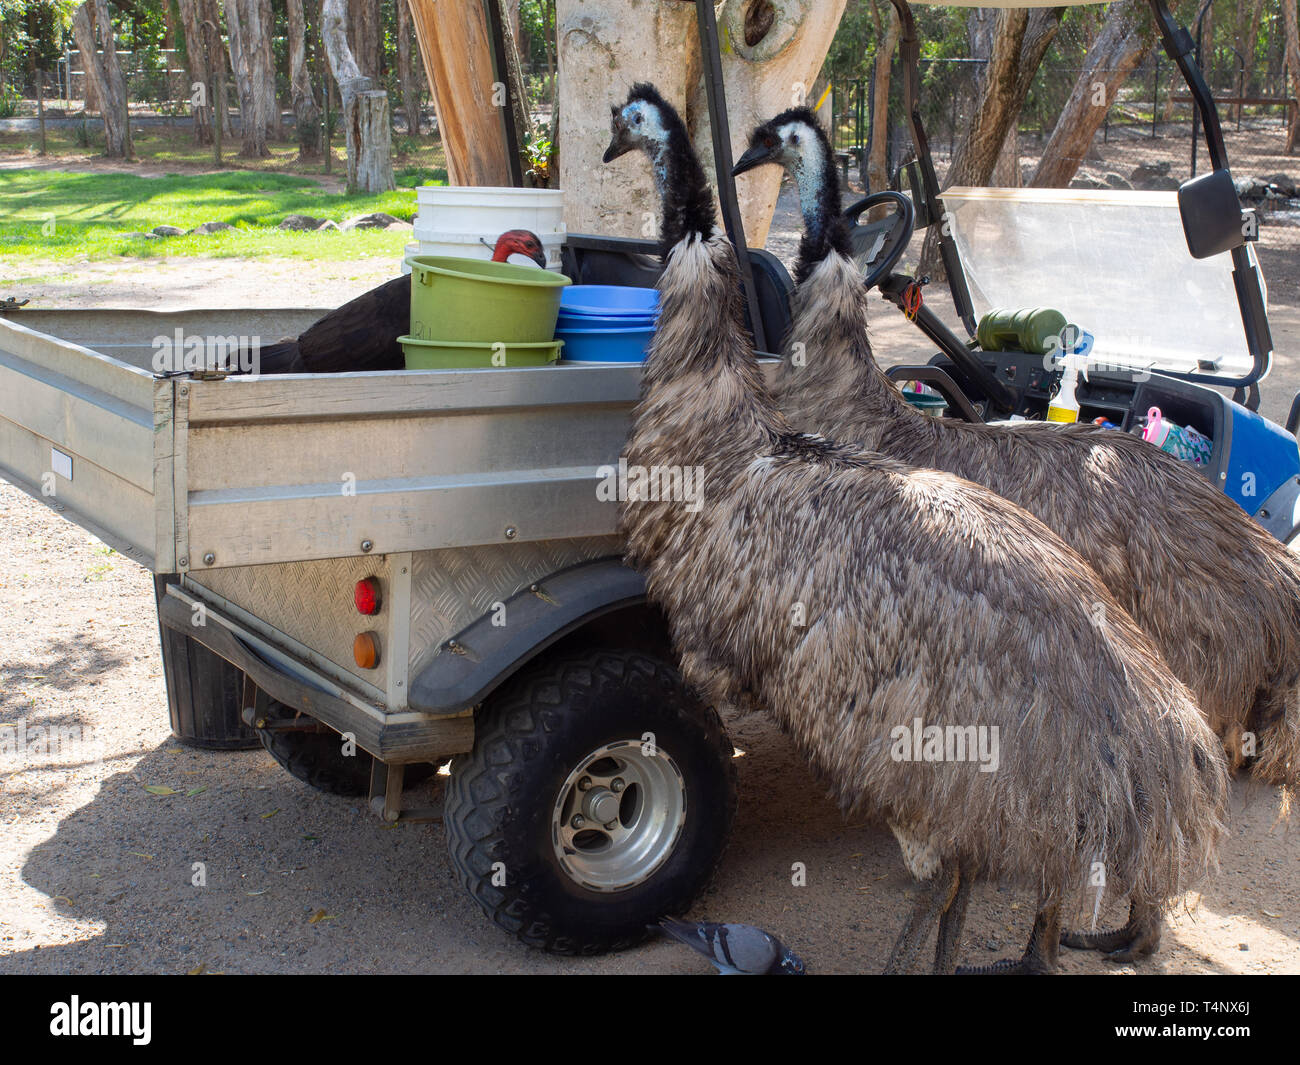 Emu Birds Eating Off The Back Of A Vehicle Stock Photo